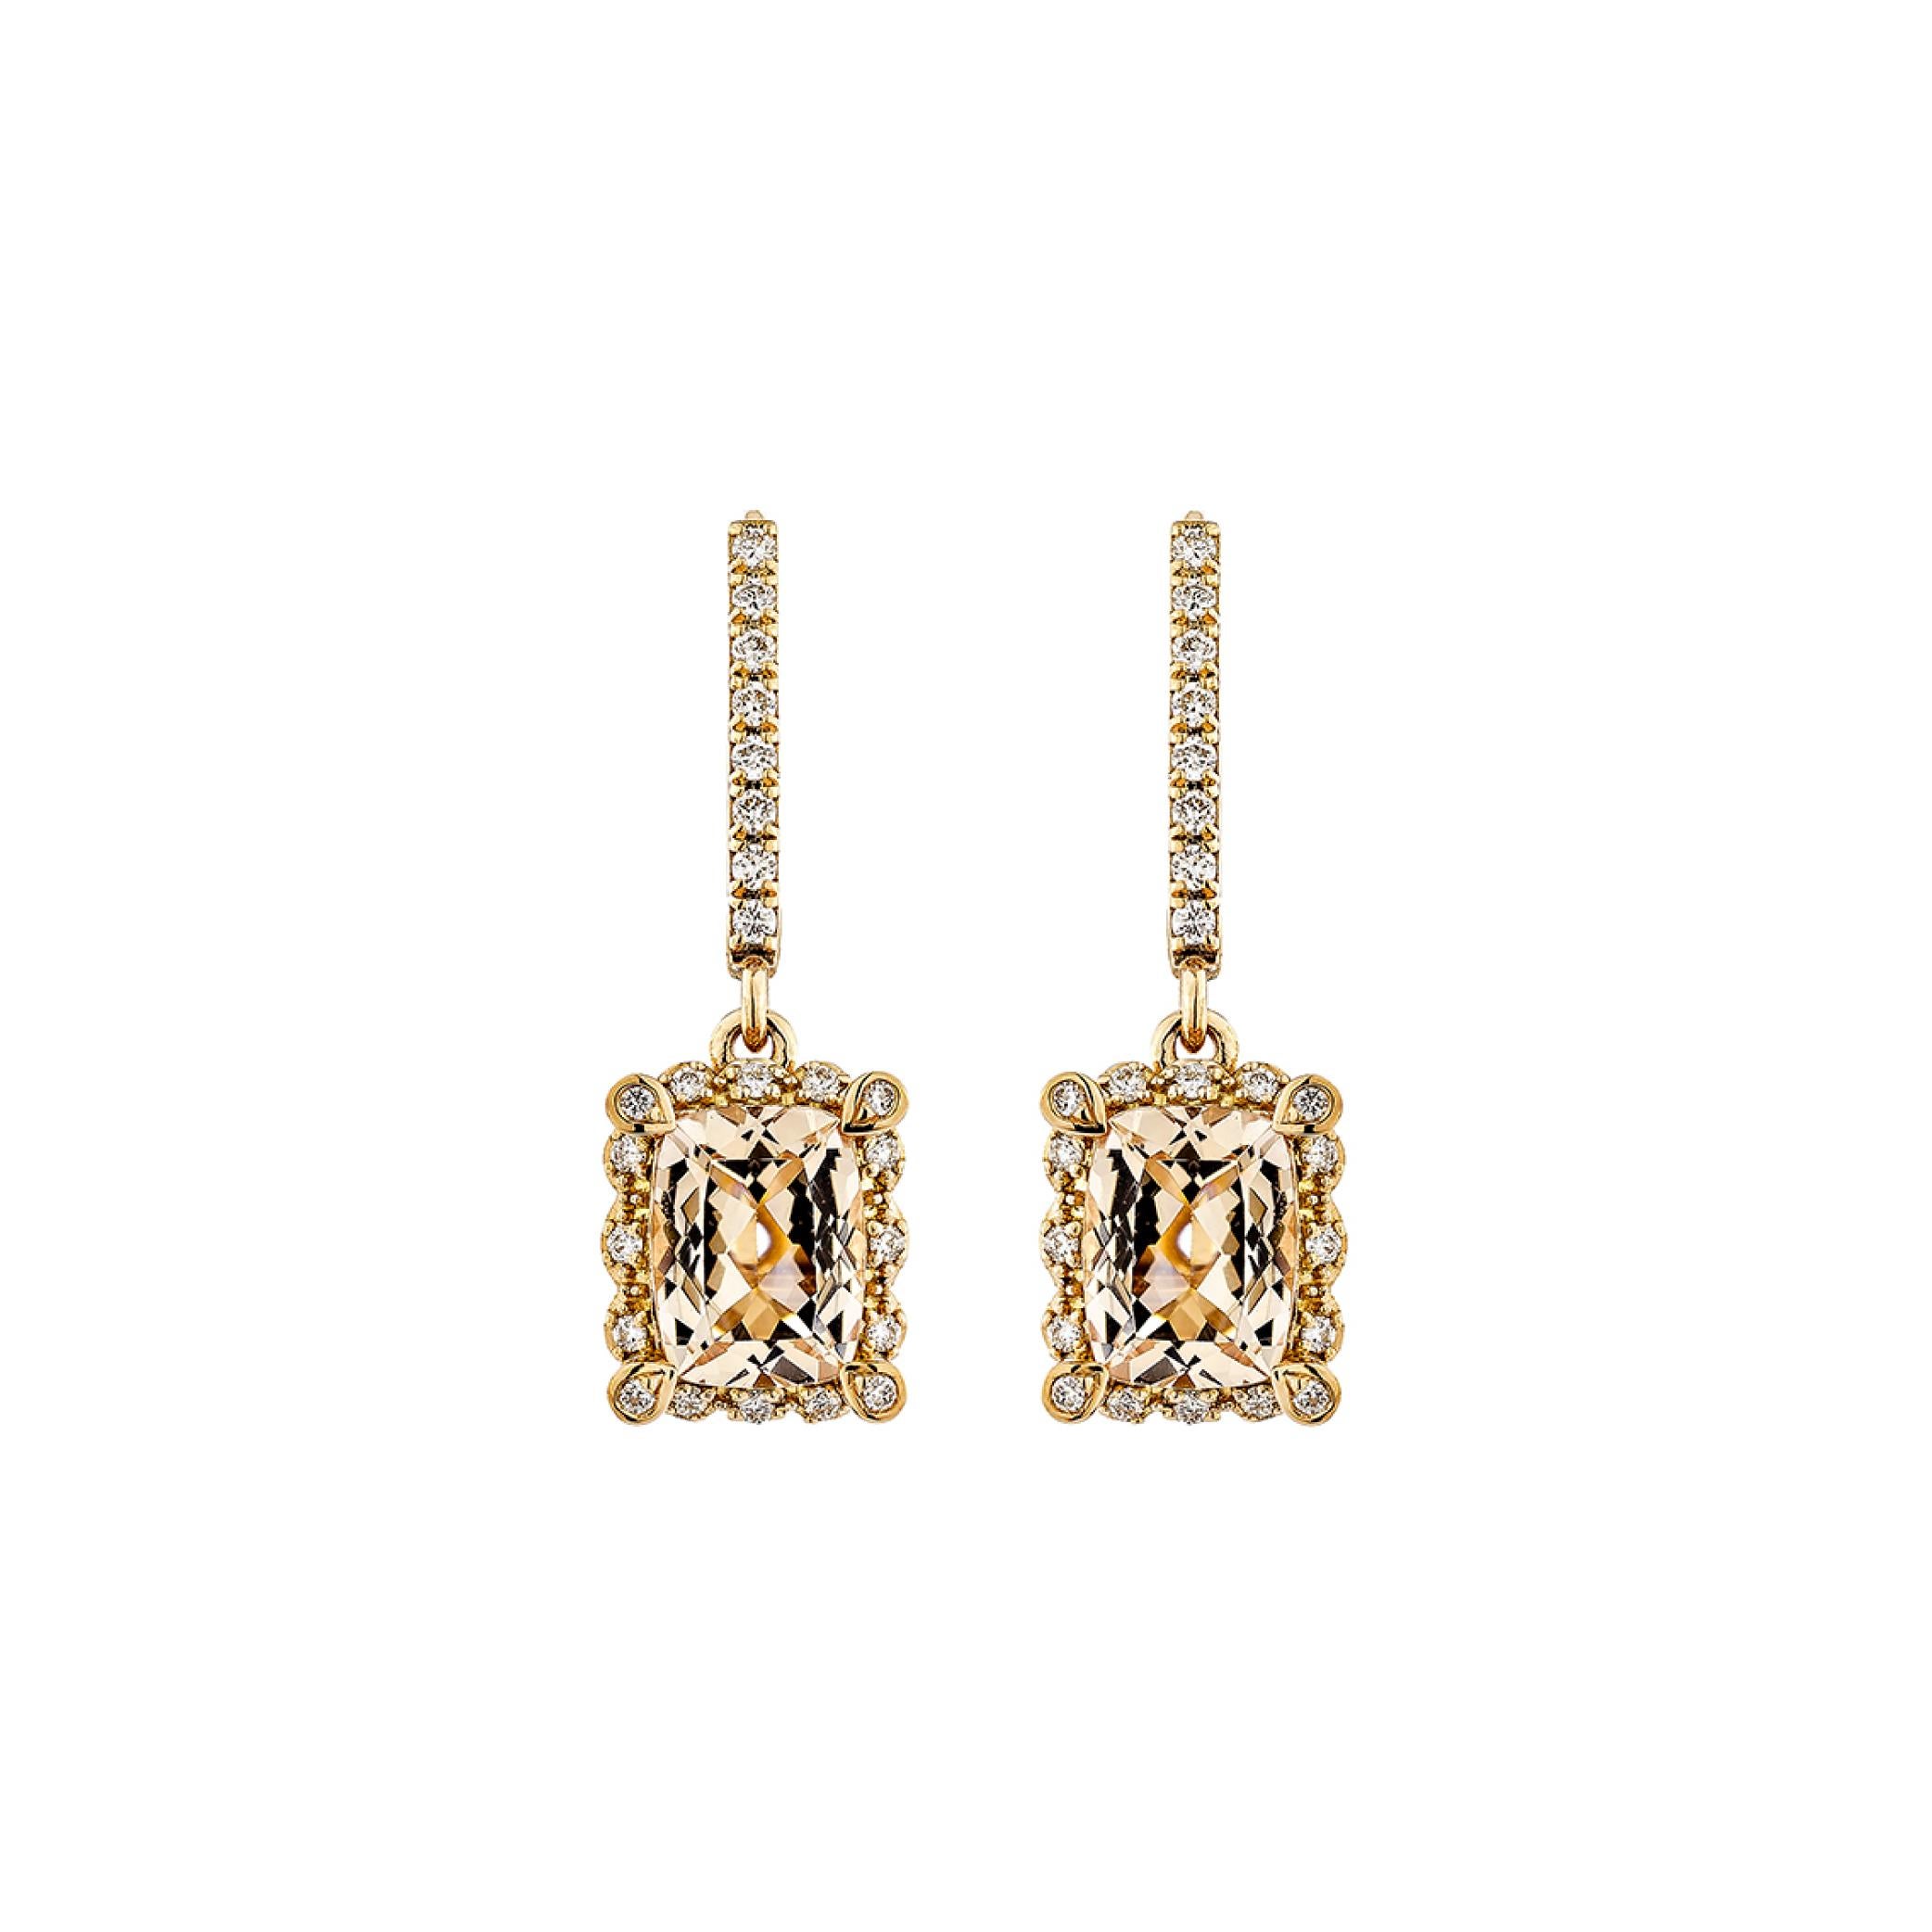 Contemporary 2.465Carat Morganite Lever Back Earring in 18Karat Rose Gold with White Diamond. For Sale